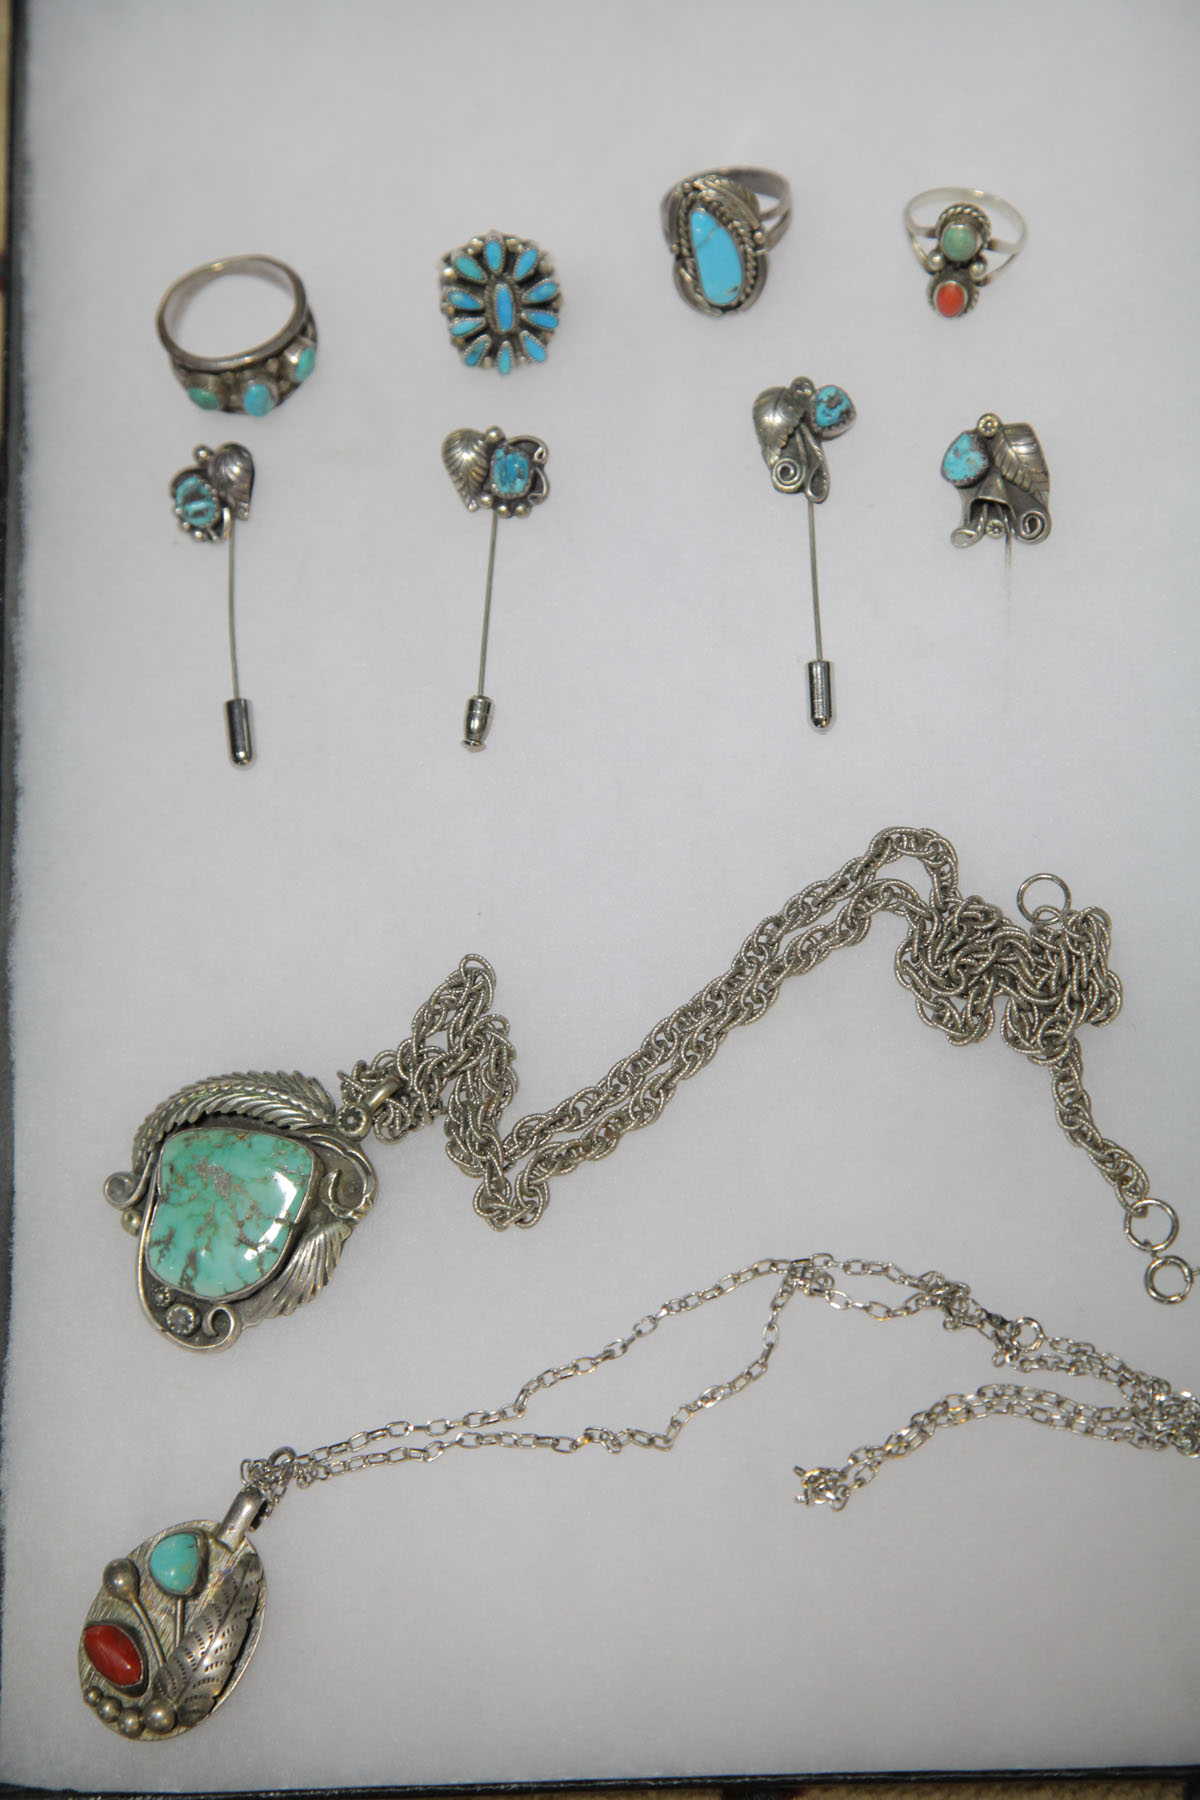 GROUP OF NATIVE AMERICAN JEWELRY.